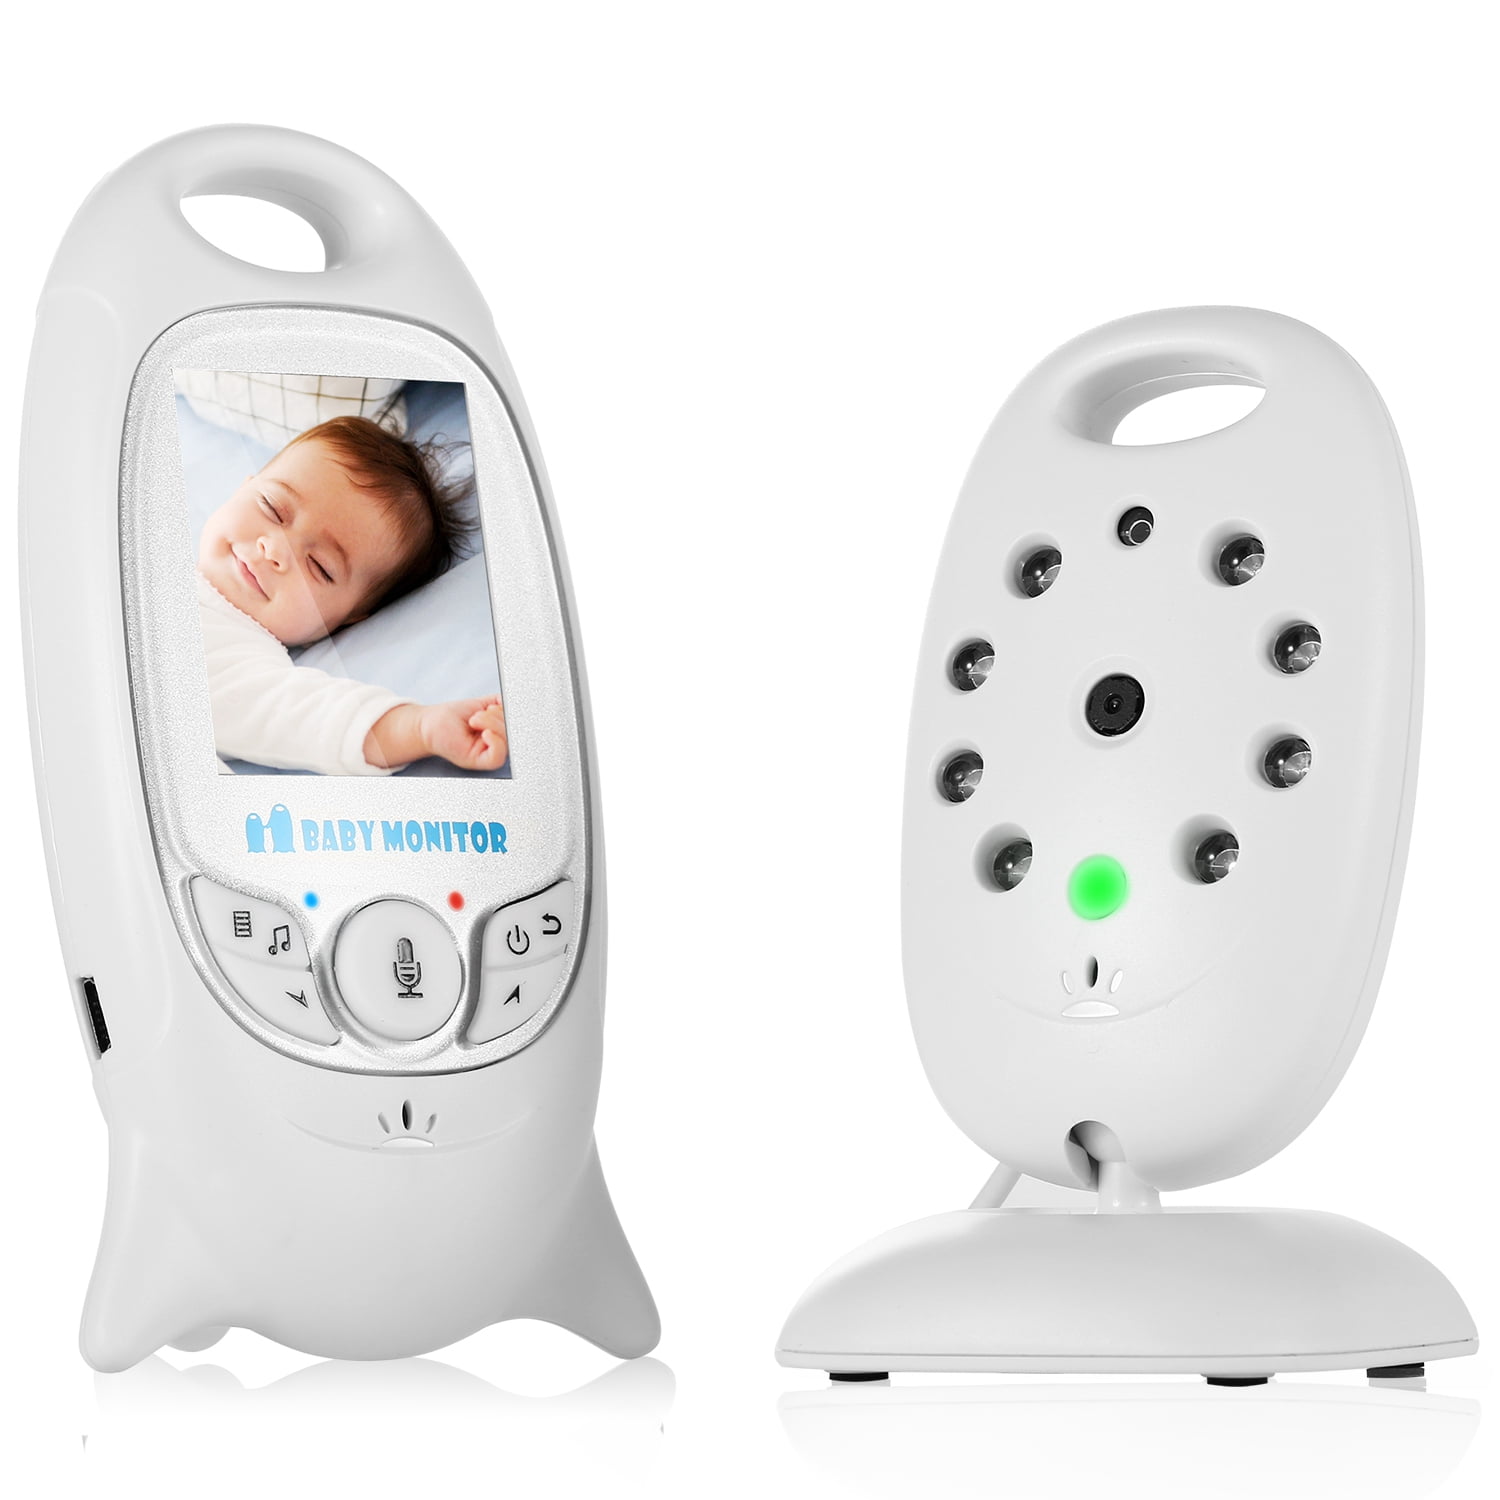 1 Set 2.4GHz Wireless Audio Baby Monitor Digital Voice Monitor Support Two-Way Talk Night Vision Built-in Battery US Plug